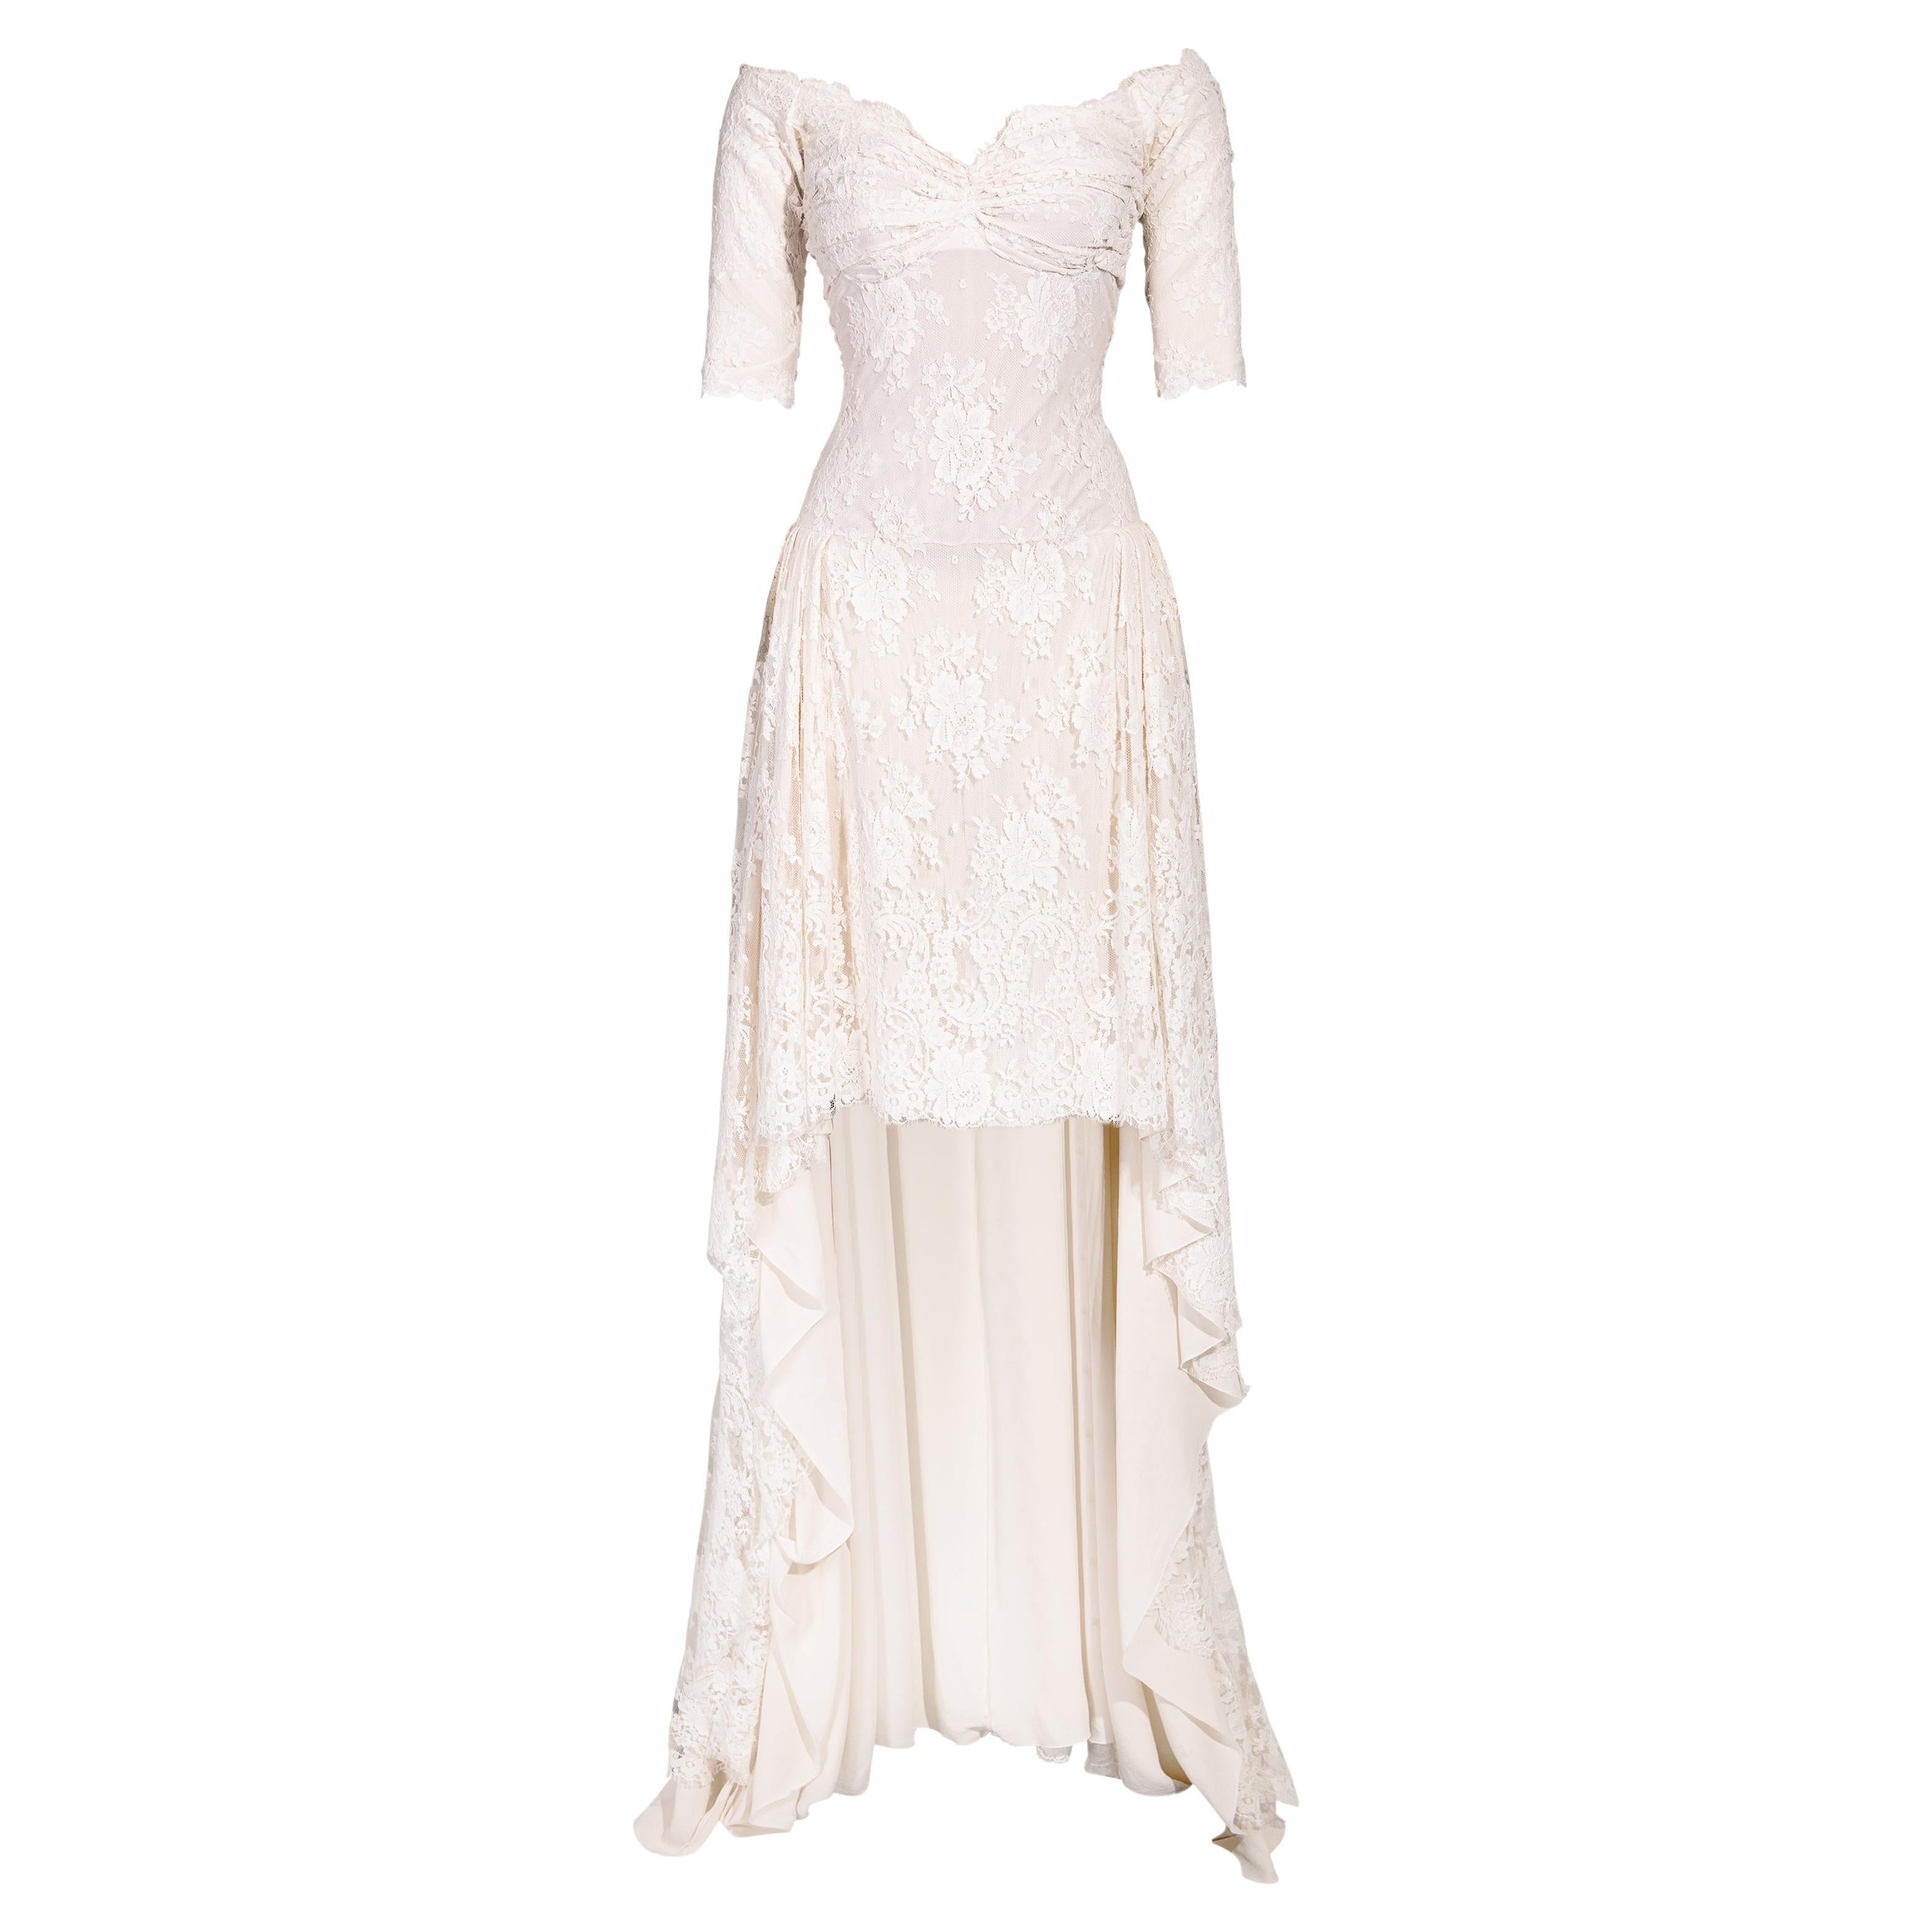 S/S 2007 Alexander McQueen (Lifetime) White Lace Off-Shoulder Gown with Train For Sale